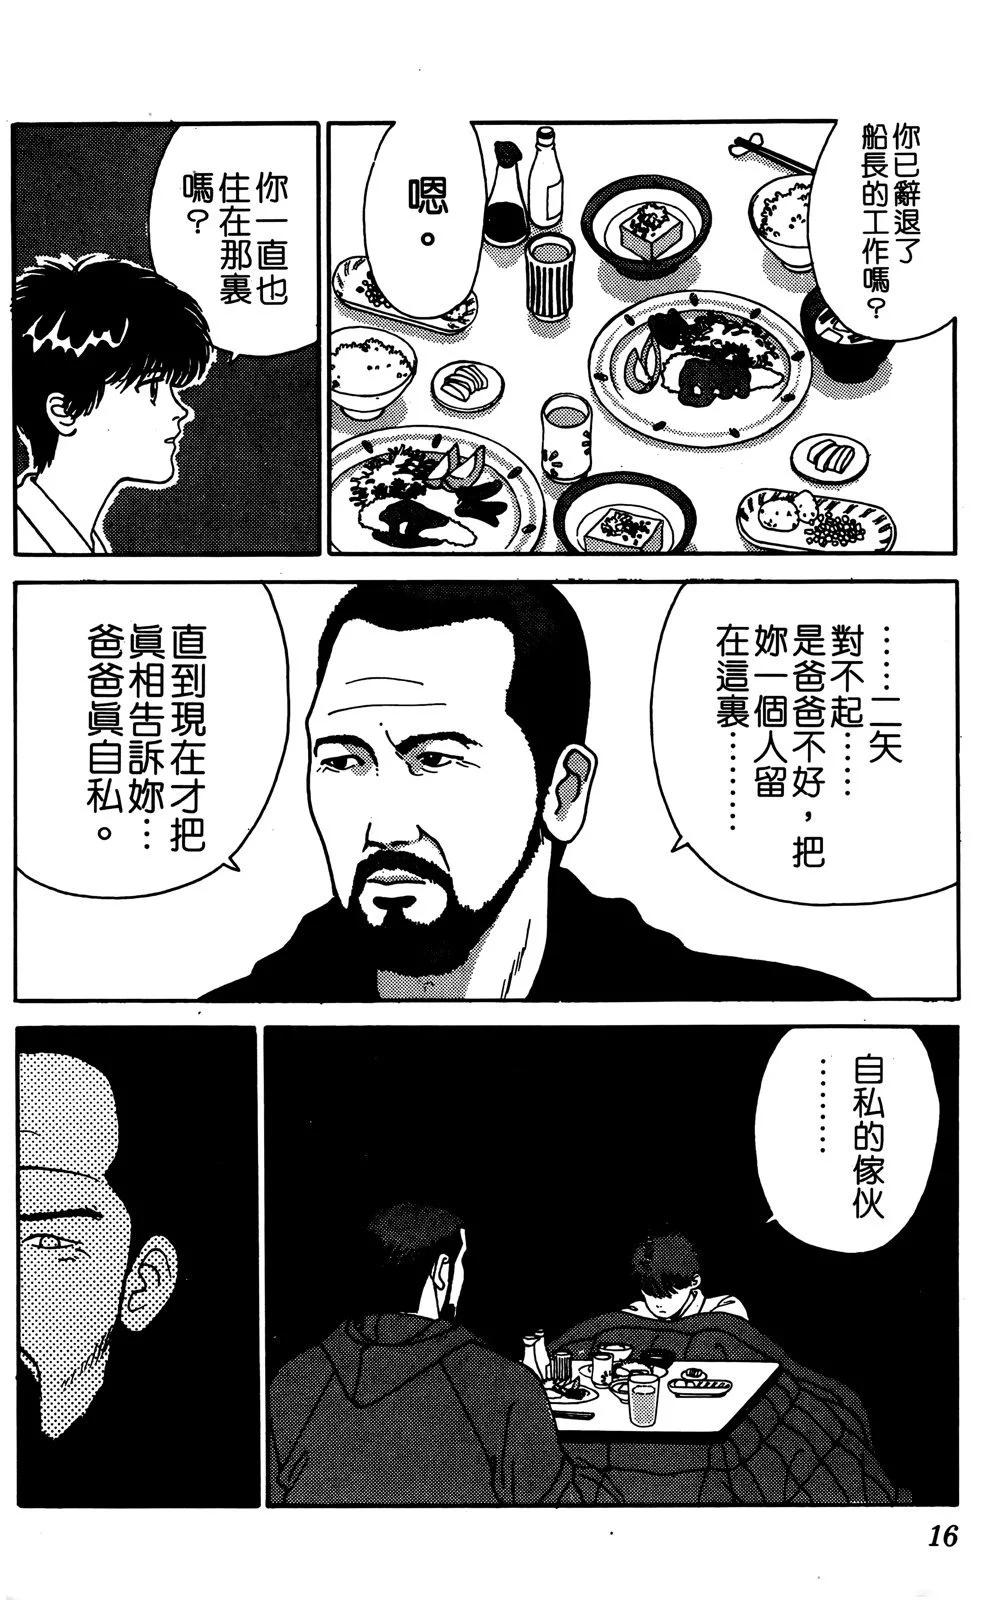 TO-Y - 第09卷(1/4) - 1